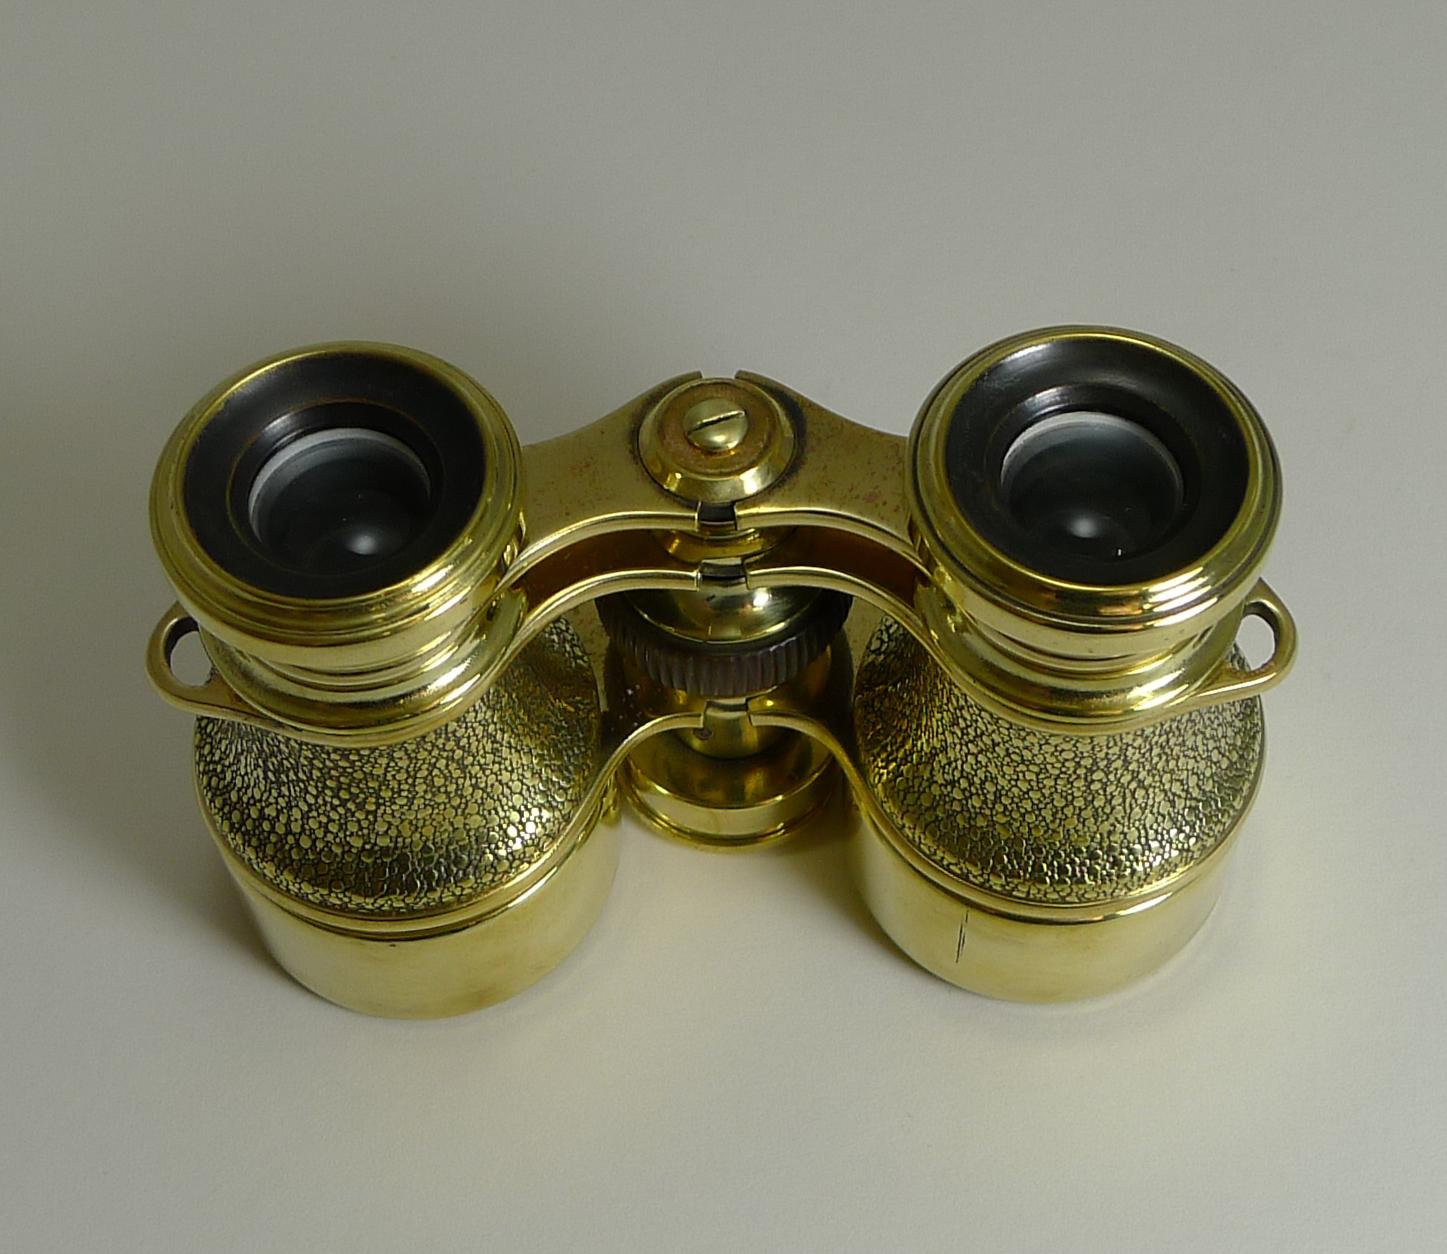 Brass Antique English Field Glasses / Binoculars by Lawrence and Mayo - With Compass